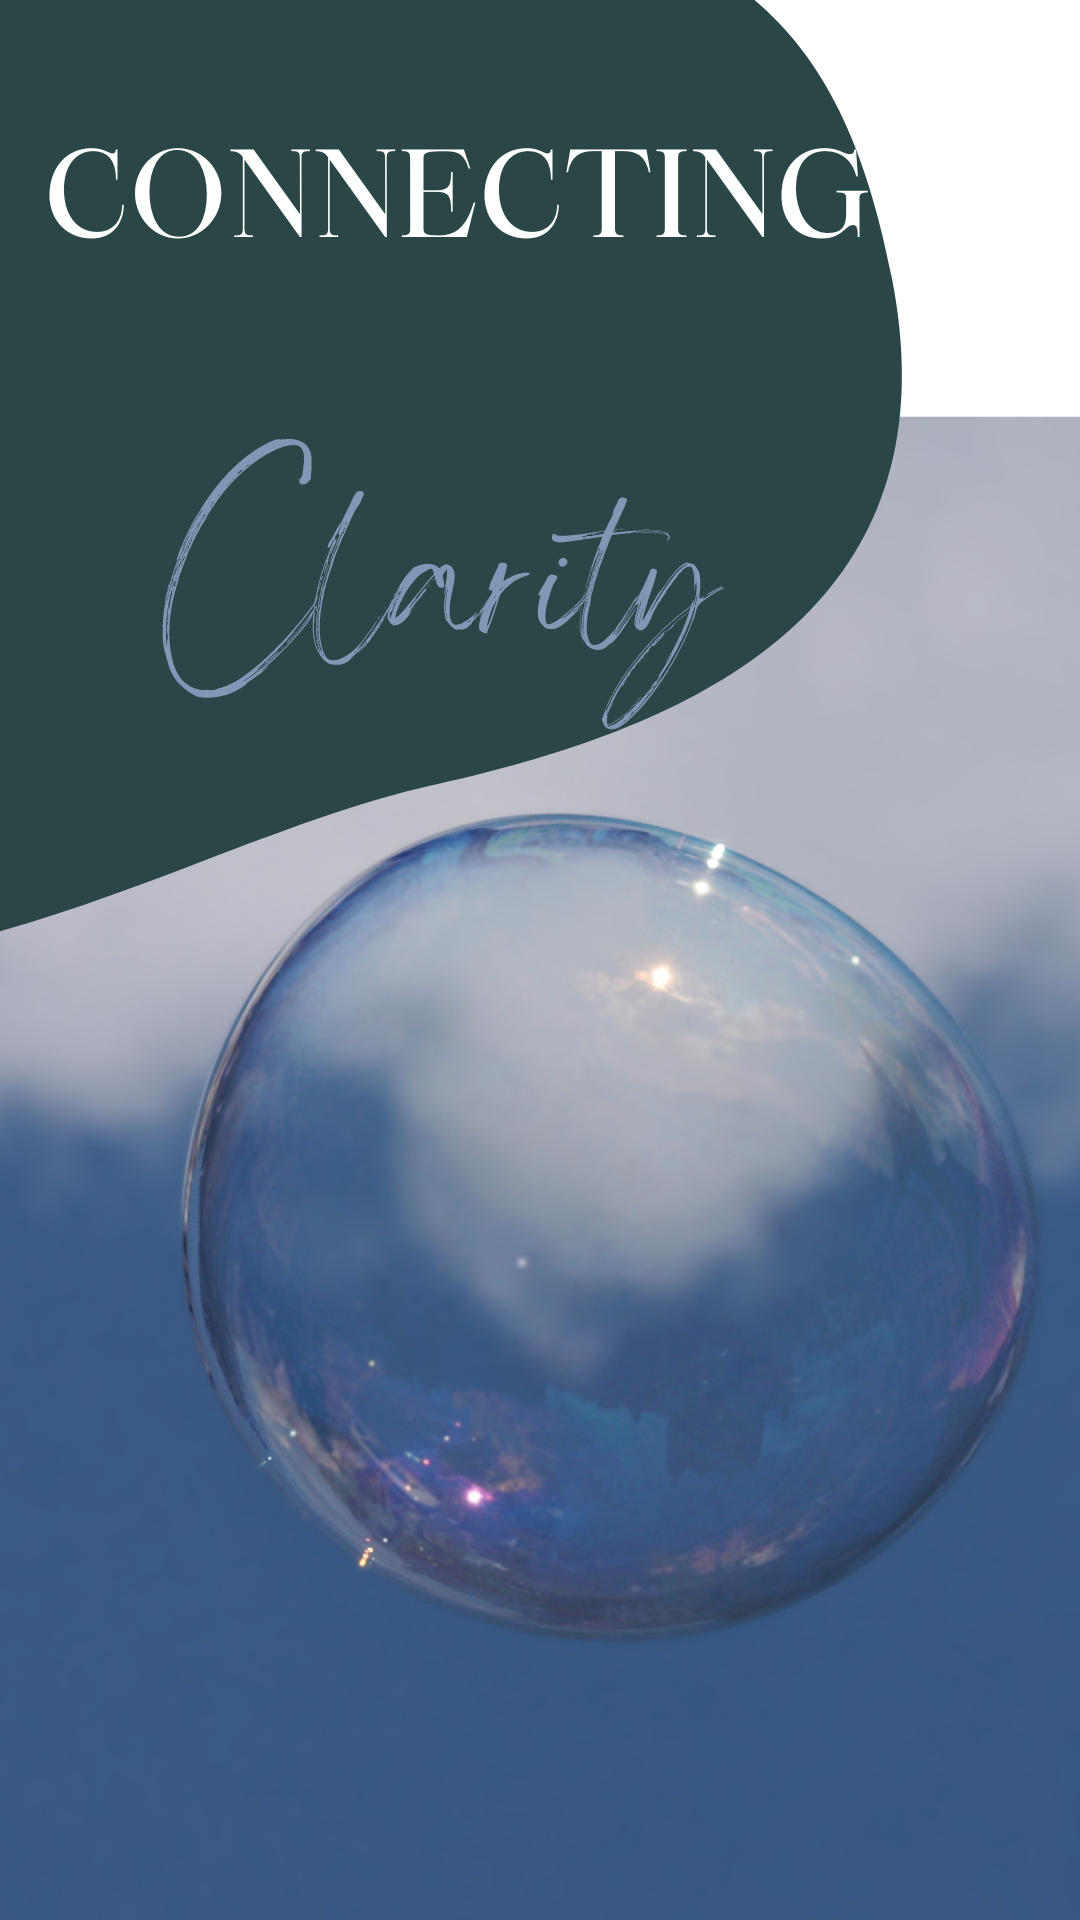 Connecting with Clarity represented by a floating bubble